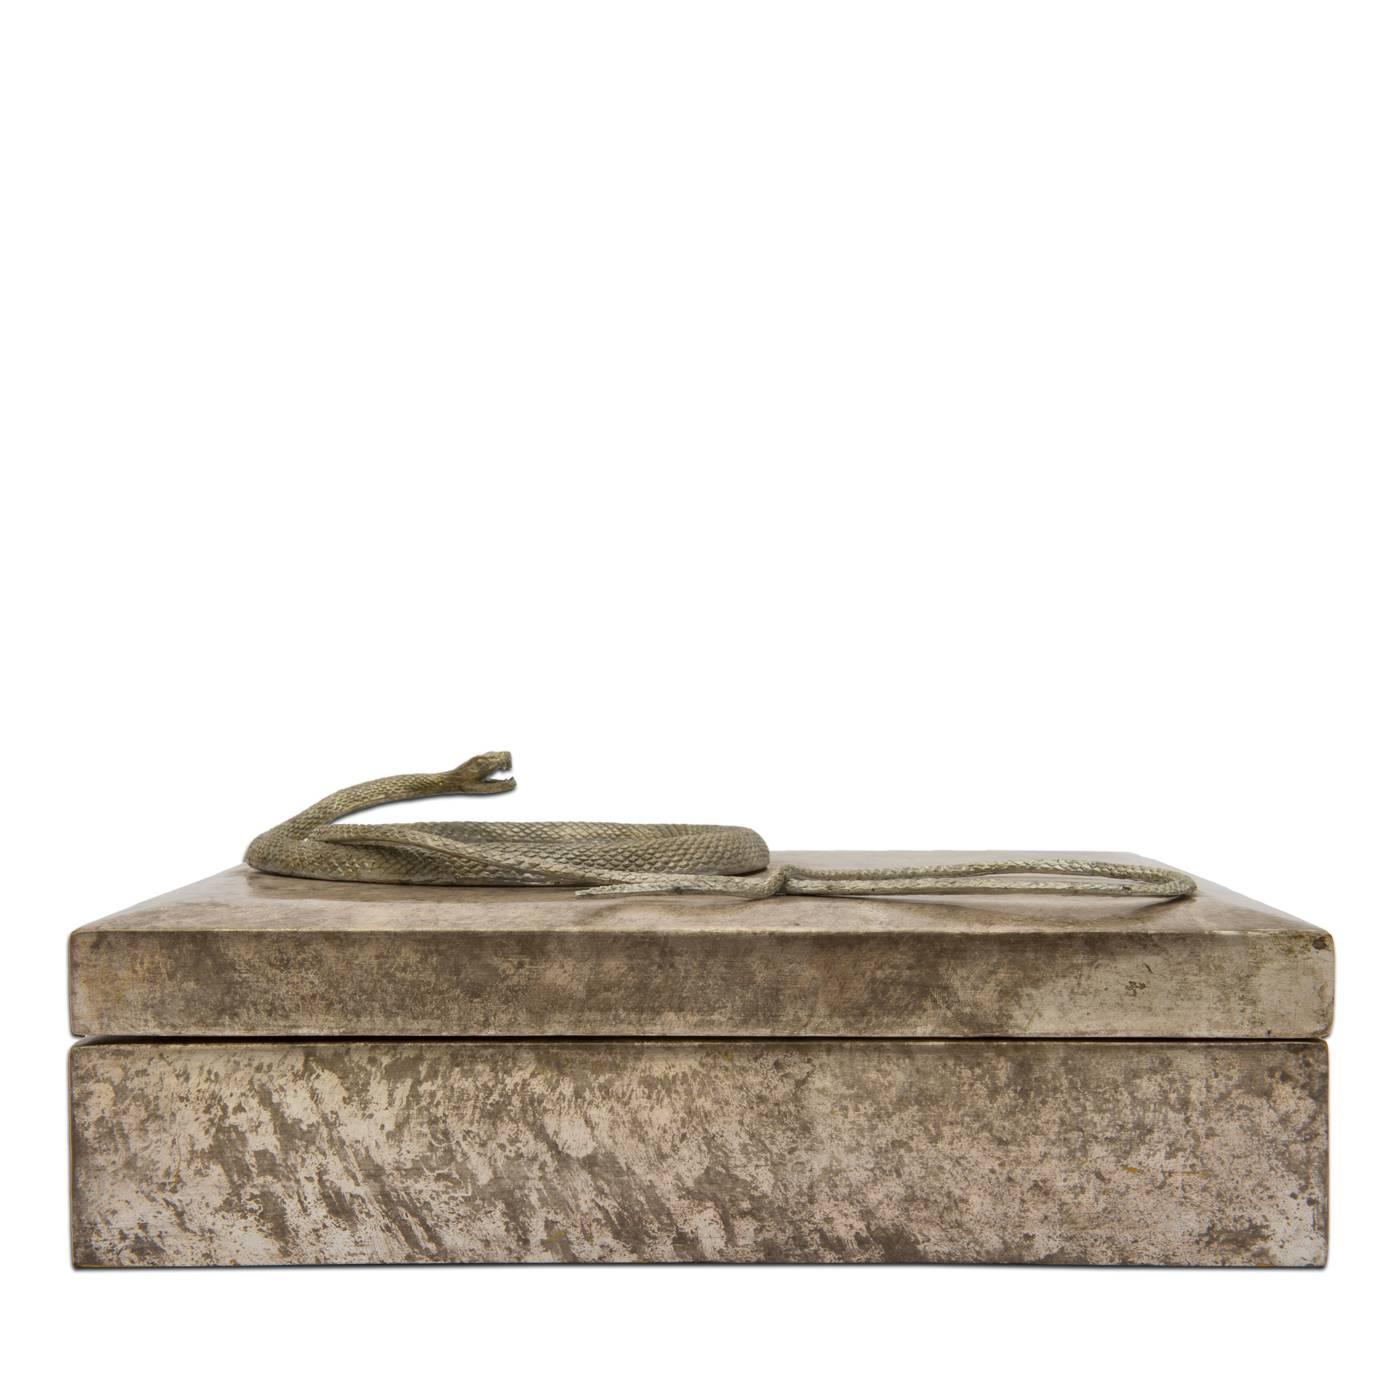 This is an effulgent wooden case in silver leaf finish by Neapolitan designer Bottiglieri. The lid is adorned with the glimmering form of an uncoiling snake, representing the life energy of light. Originally the piece was designed for a coffee-table.